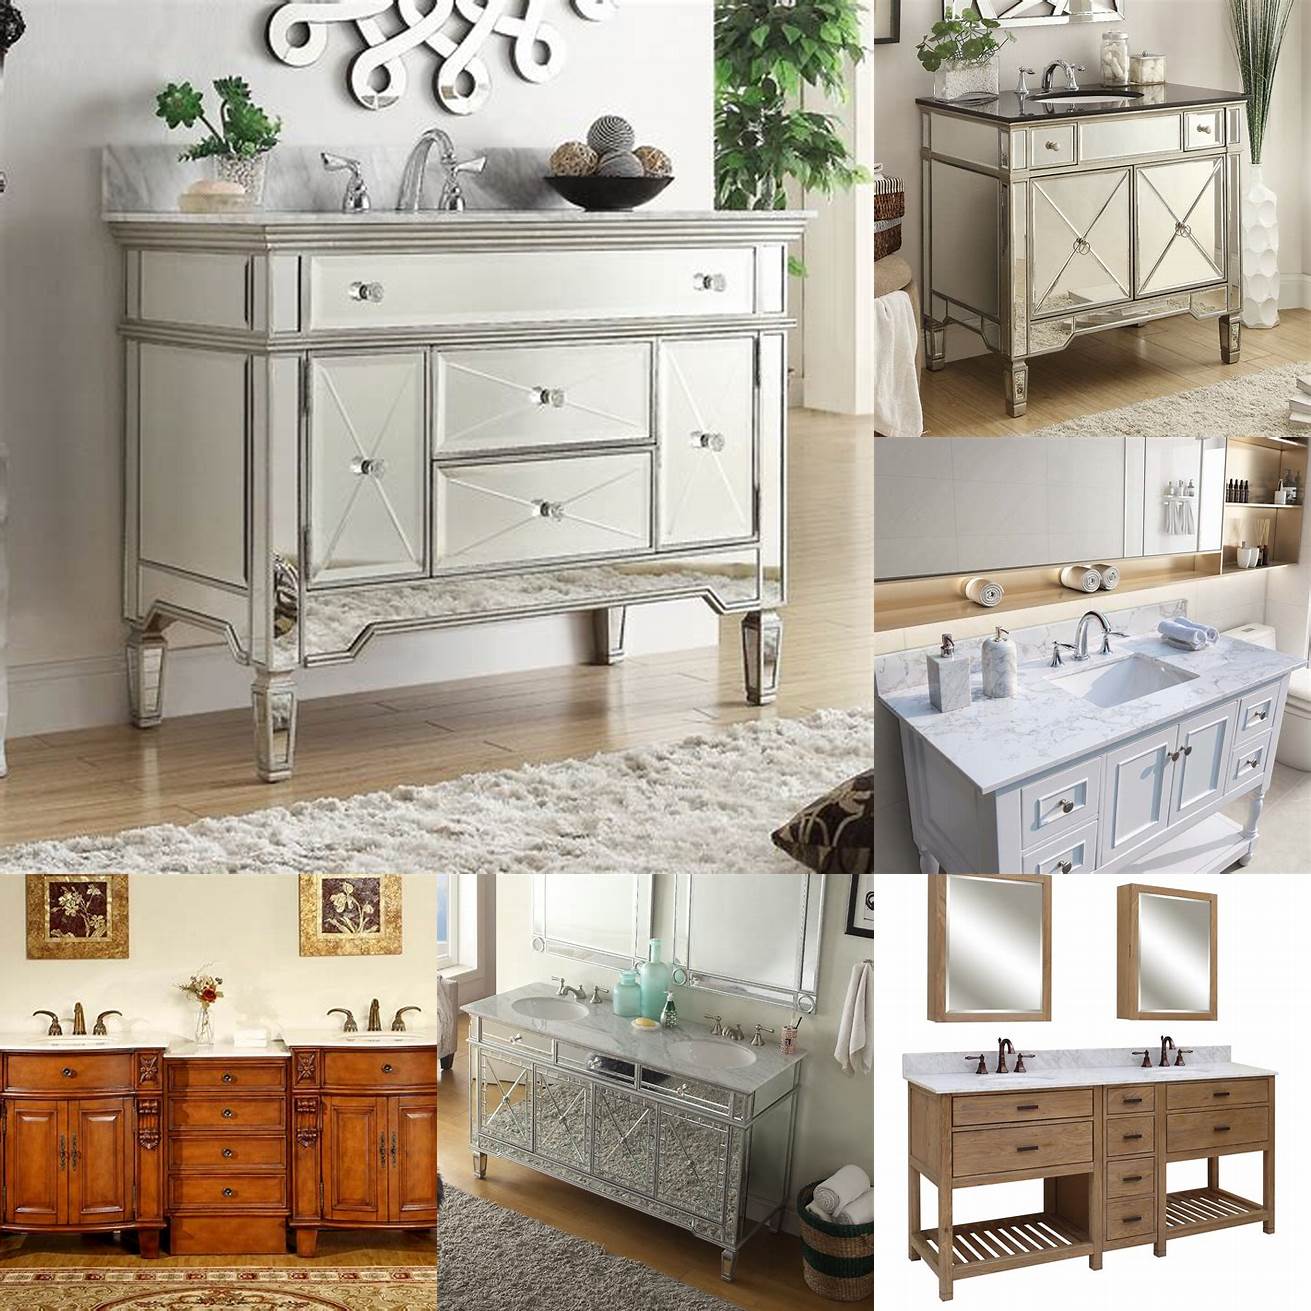 A luxurious and functional modular bathroom vanity with mirrored cabinets a polished chrome finish and a marble backsplash